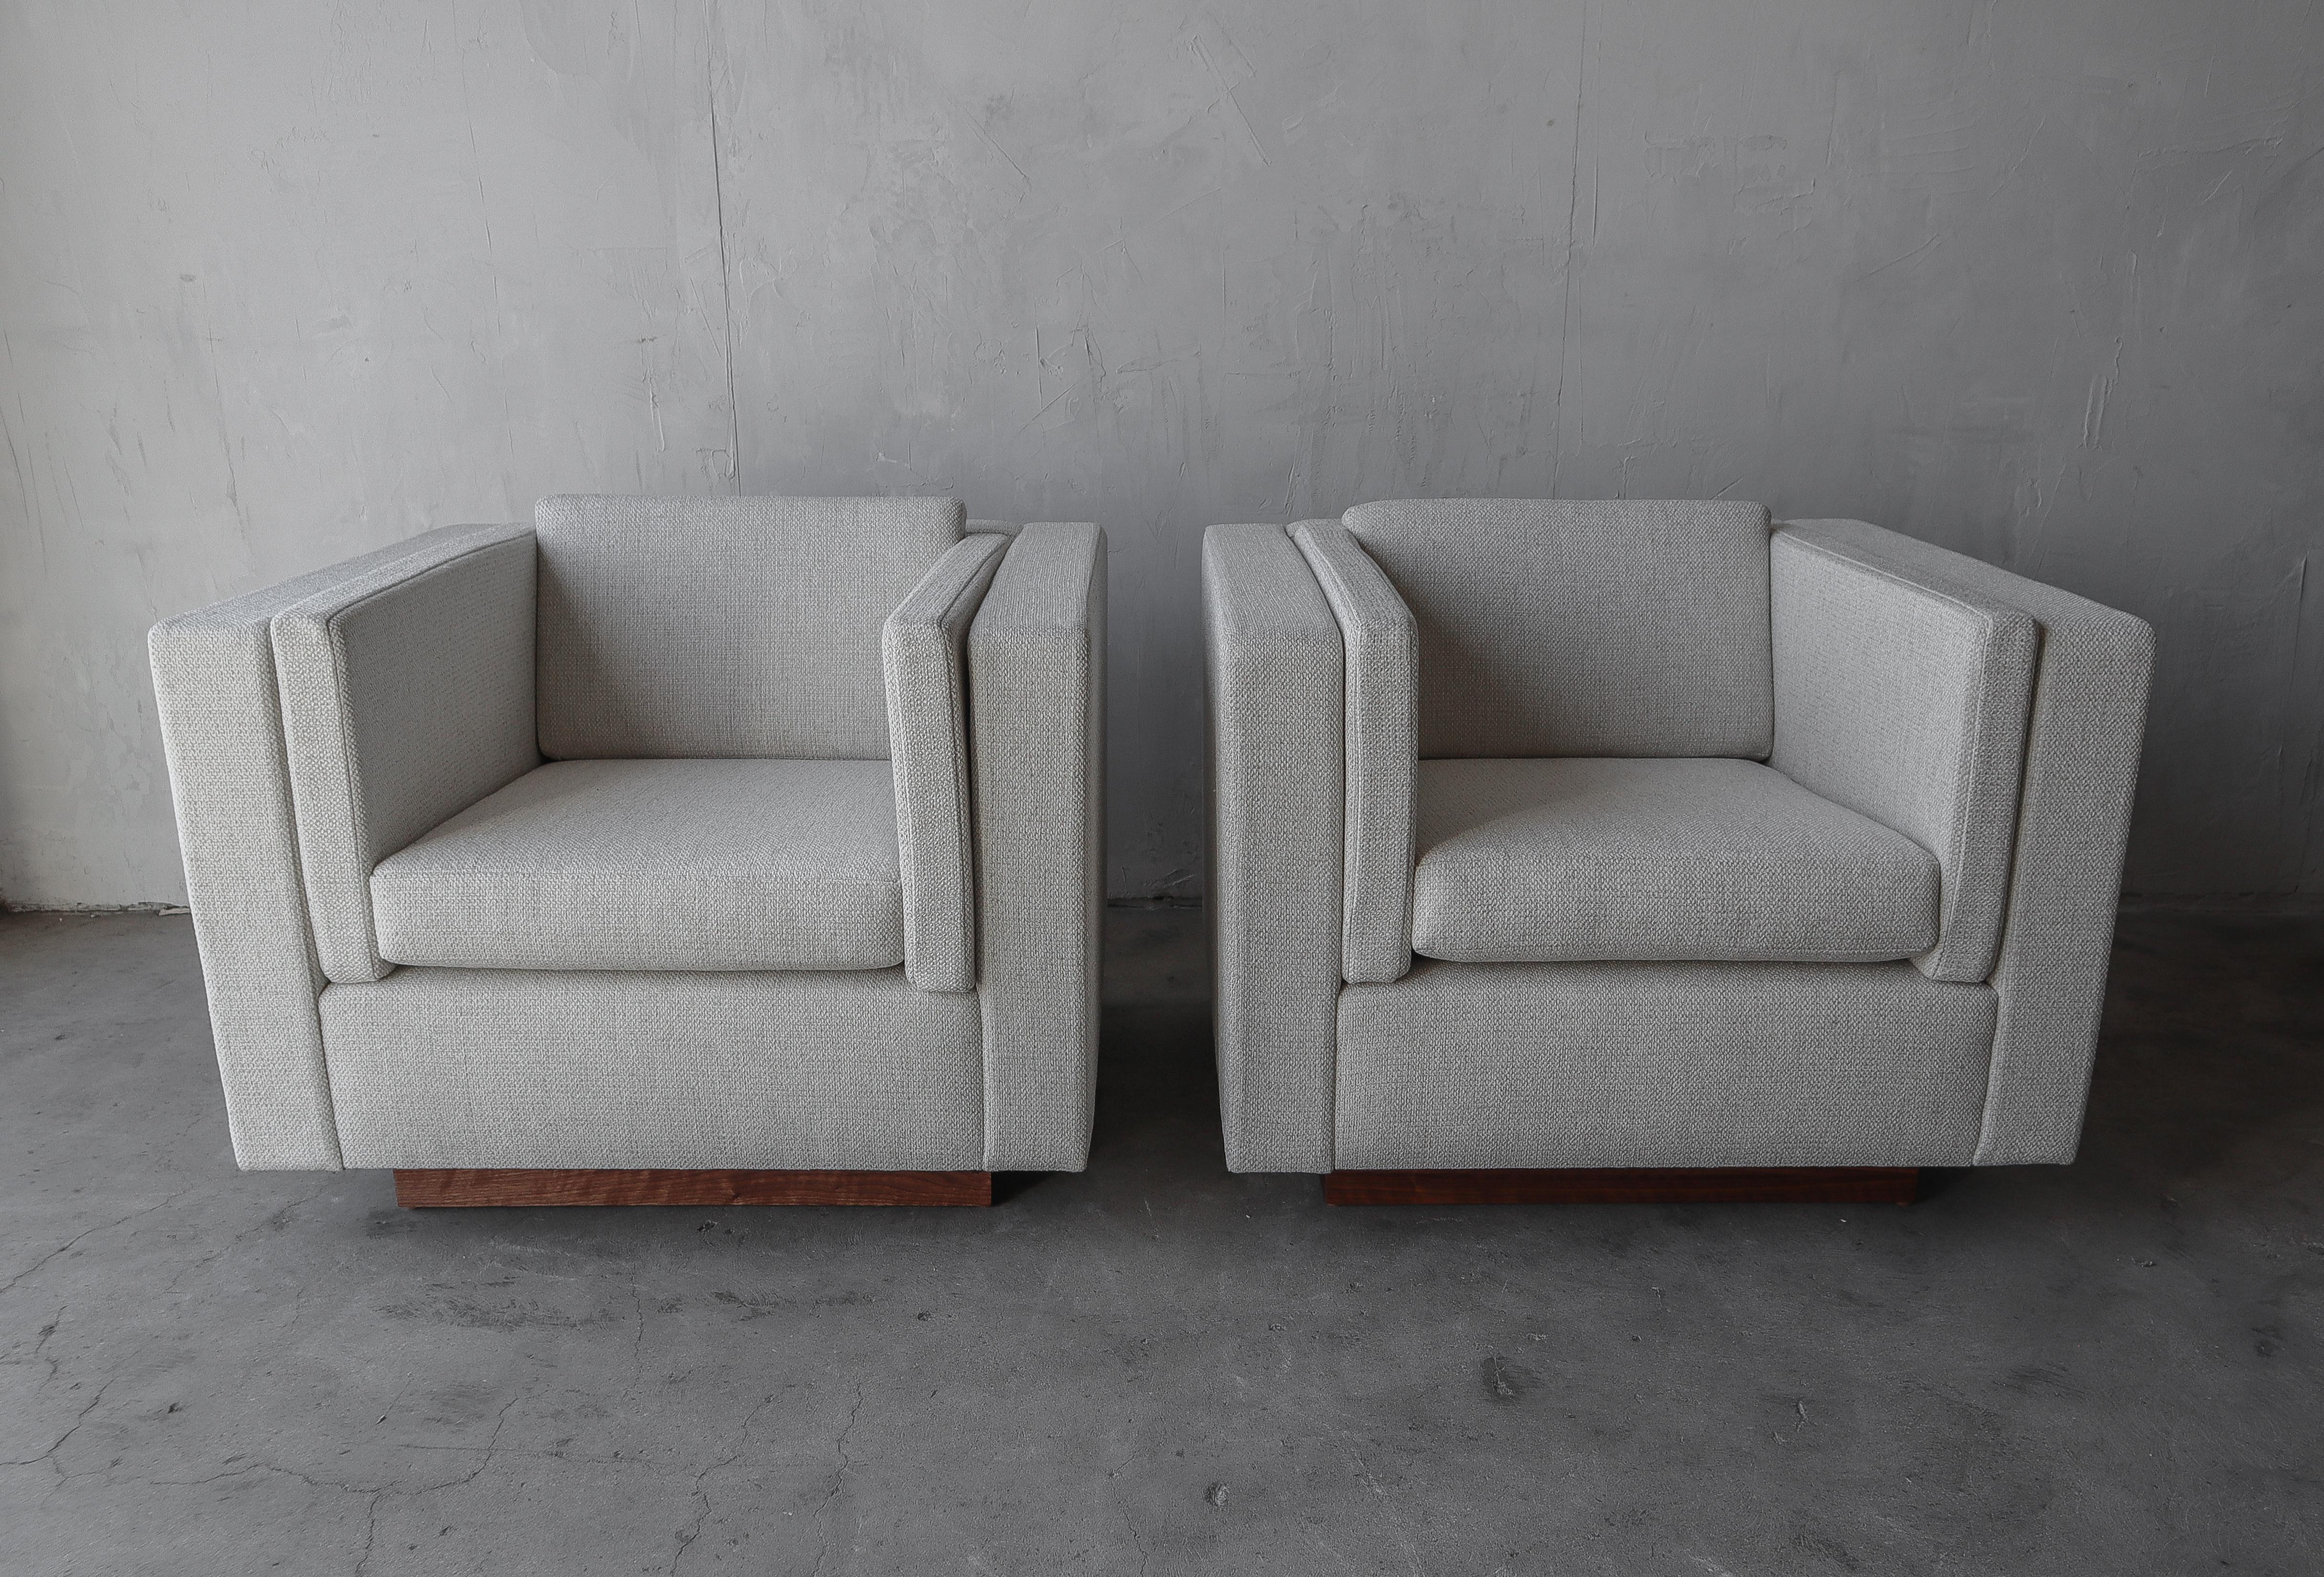 This is a gorgeous pair of cube lounge chairs with beautiful walnut plinth bases. The minimalistic style, clean lines a neutral upholstery make them the perfect addition to any decor.

The chairs have been professionally reupholstered in a great